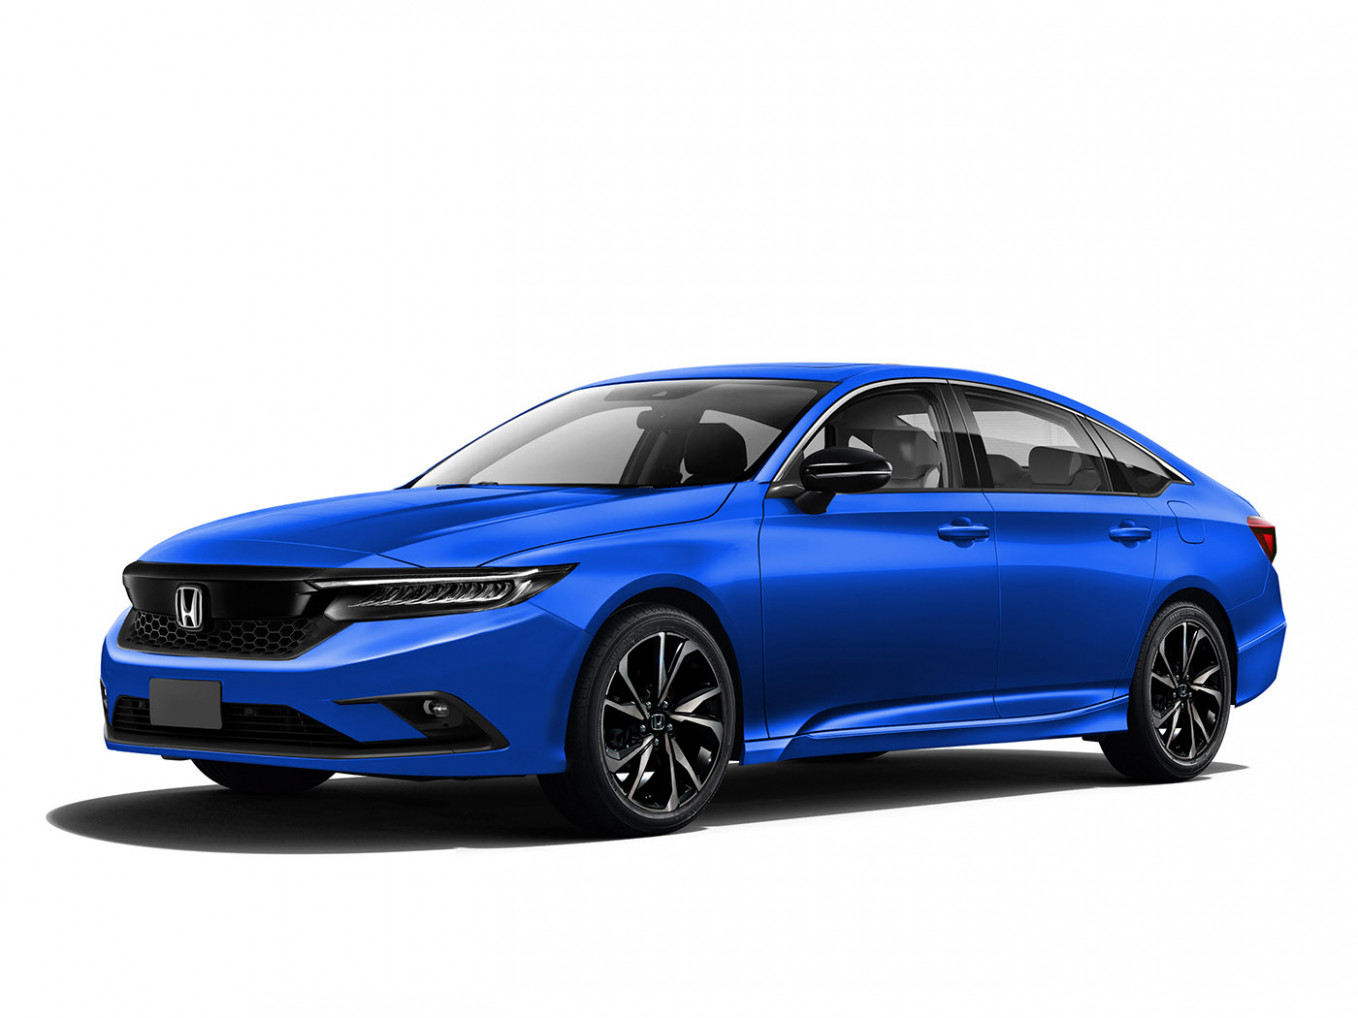 Price and Release date What Will The 2022 Honda Accord Look Like